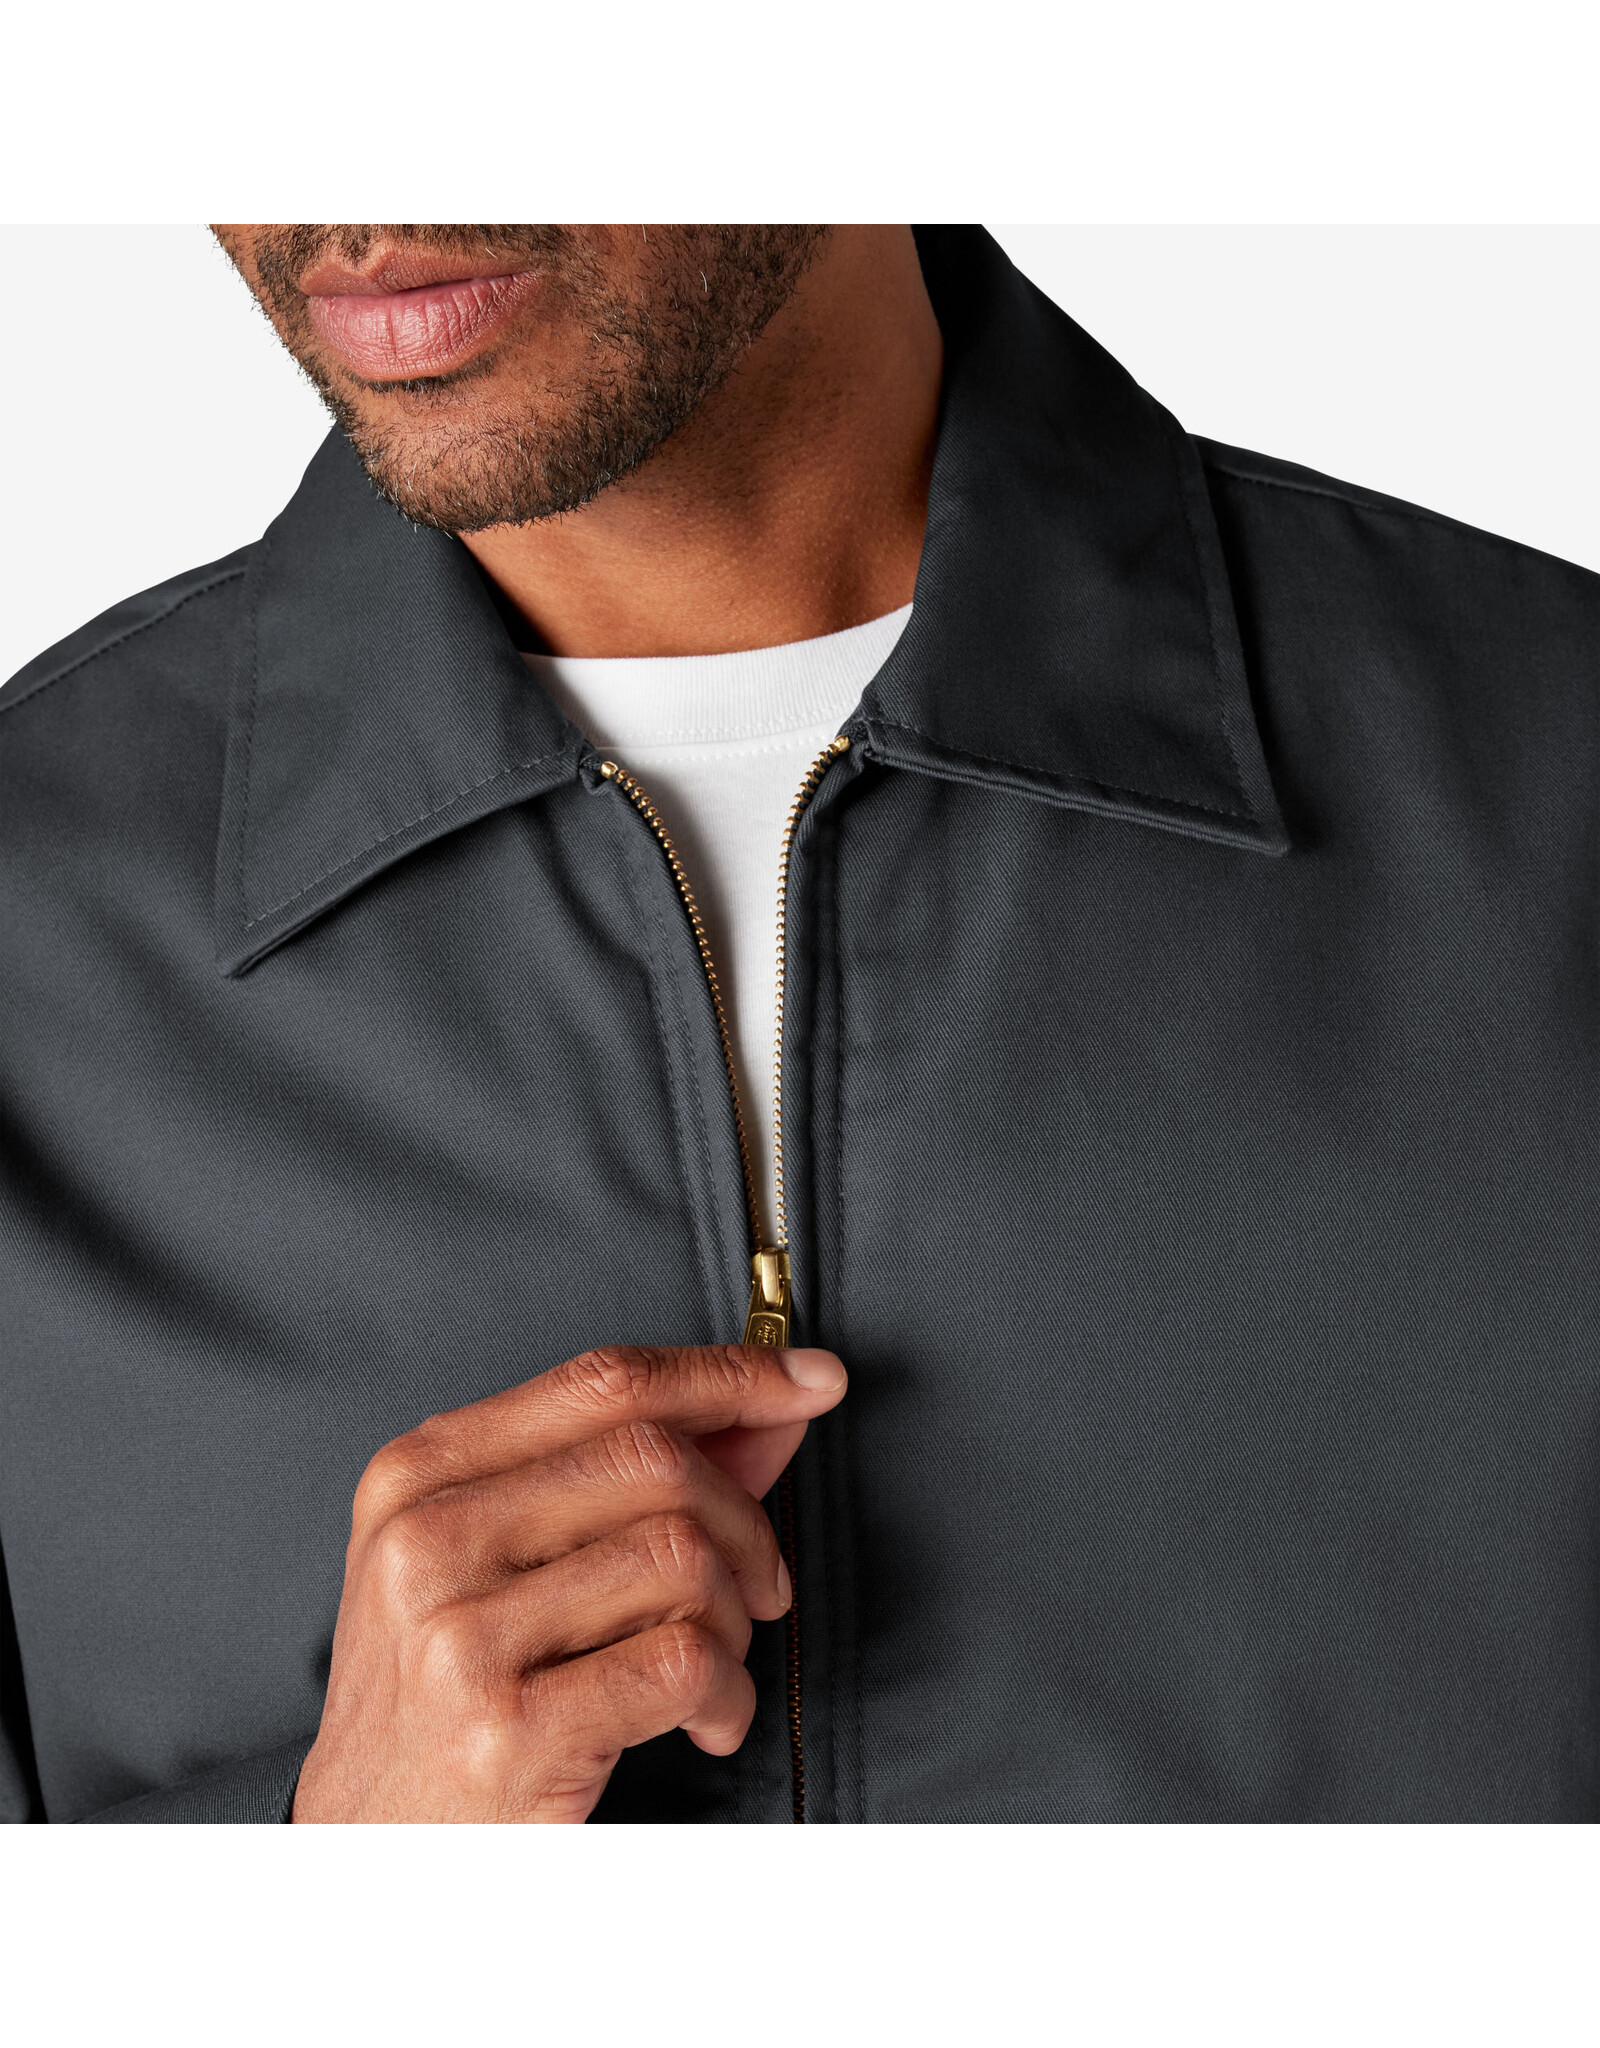 DICKIES Insulated Eisenhower Jacket Charcoal - TJ15CH